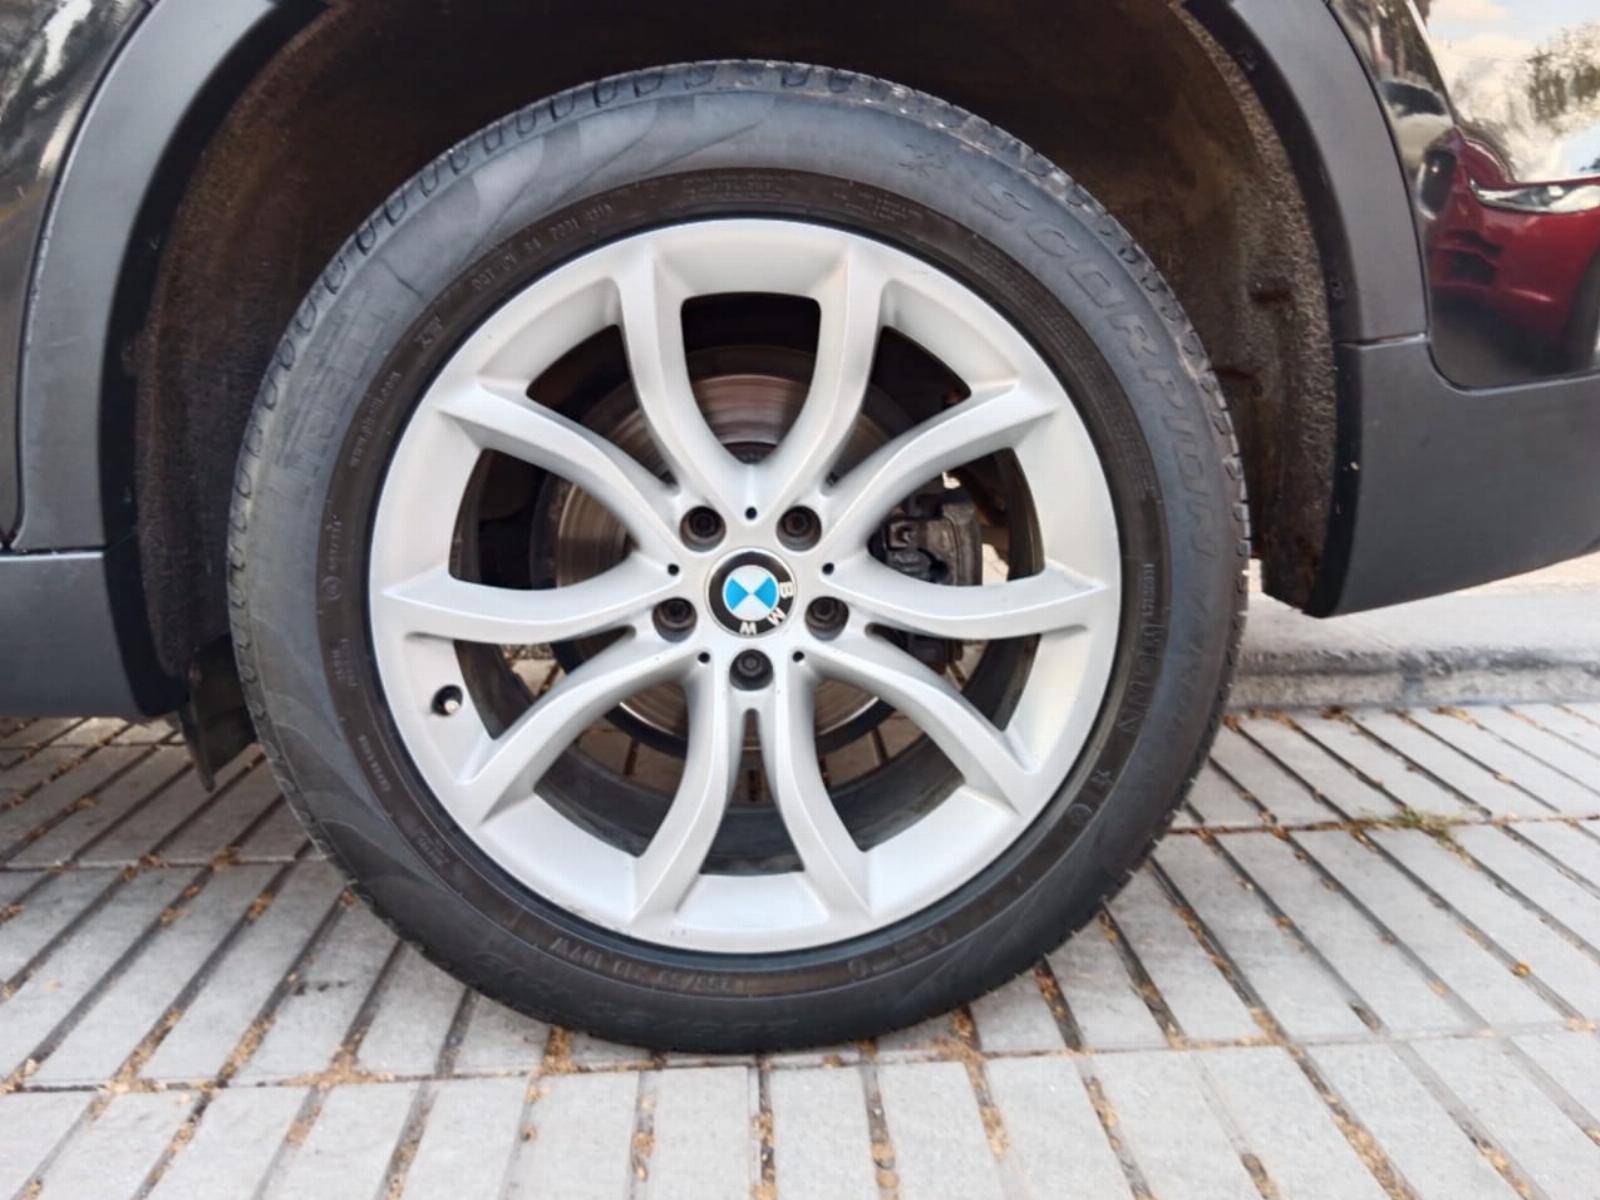 BMW X6 3.0 XDrive35I A 2018 Impecable - FULL MOTOR